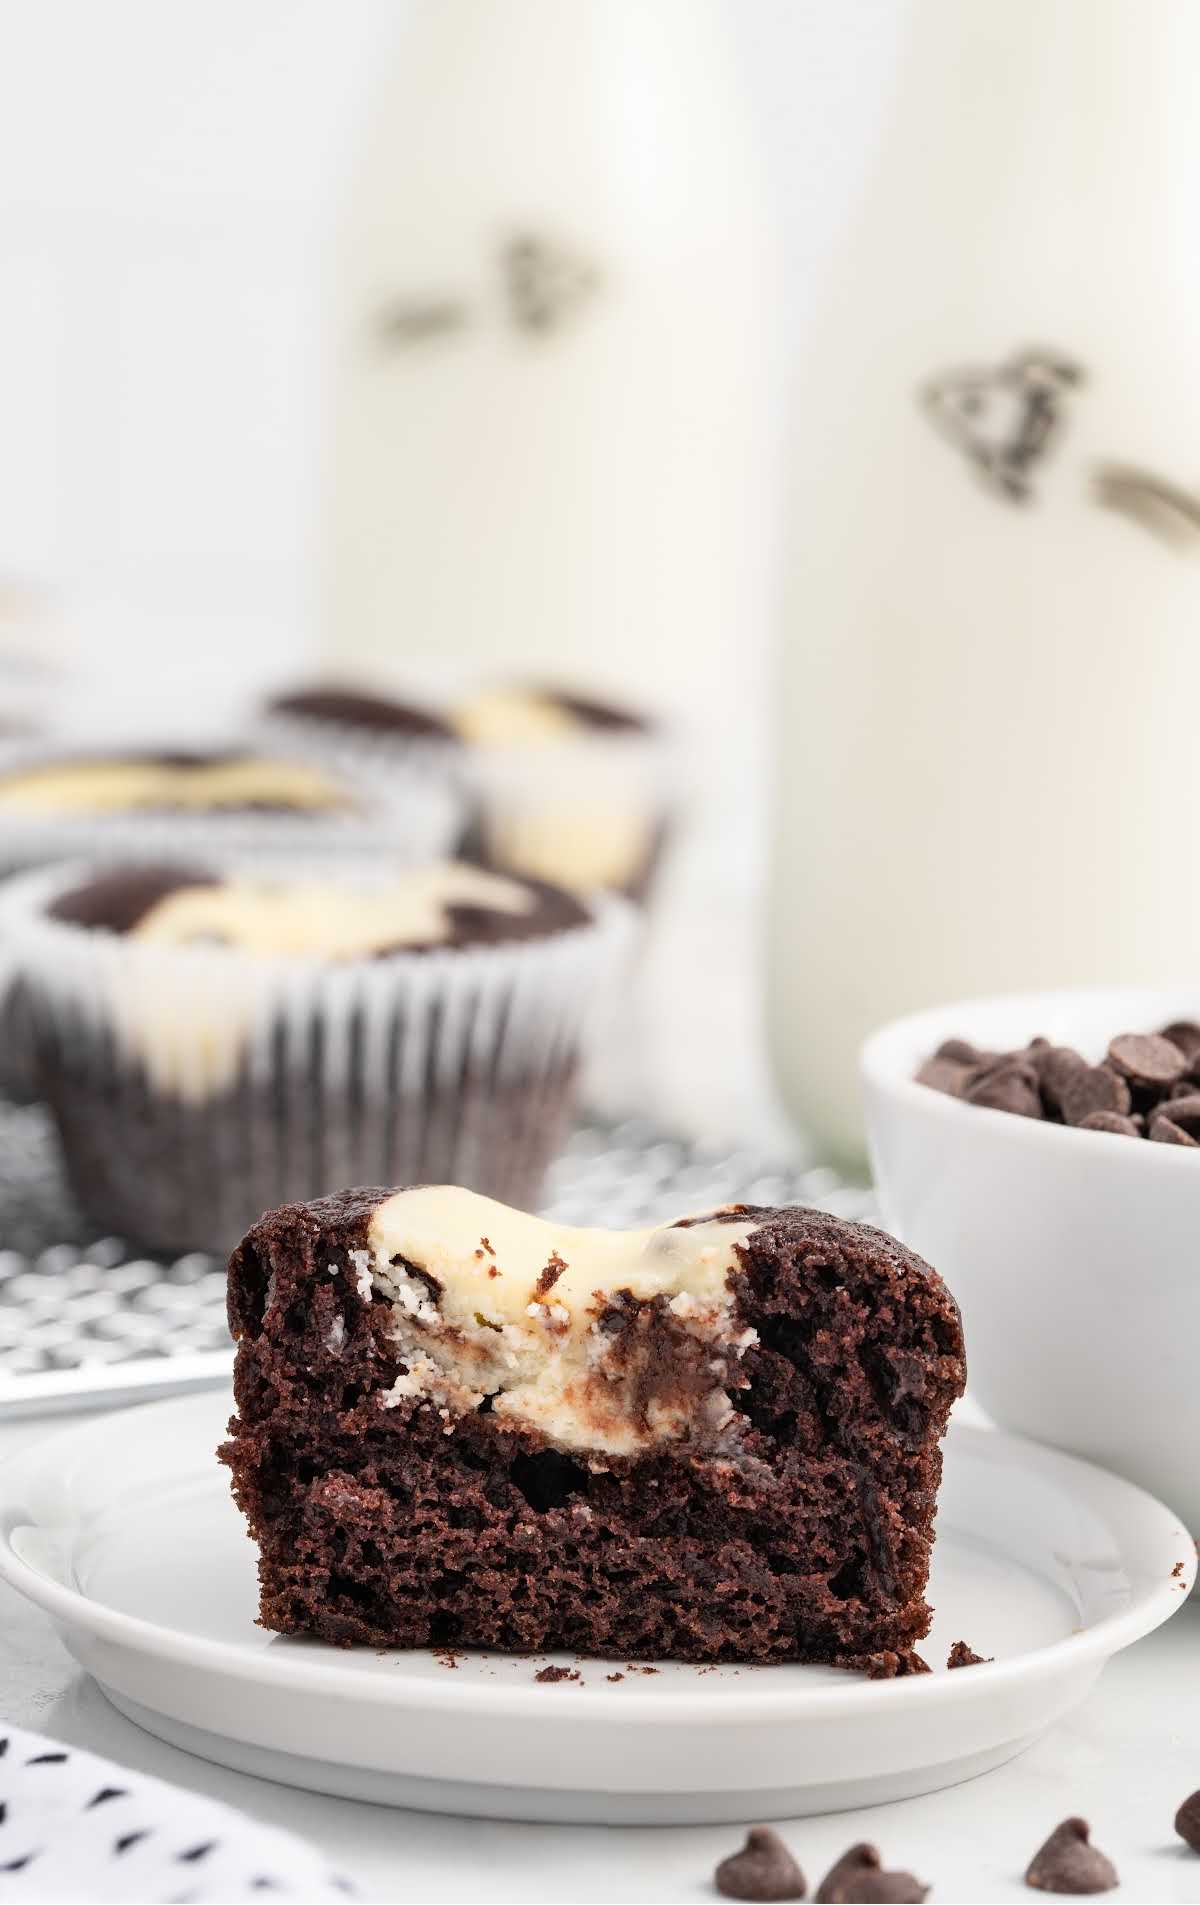 a close up shot of a Black Bottom Cupcake on a plate with a bite taken out of it